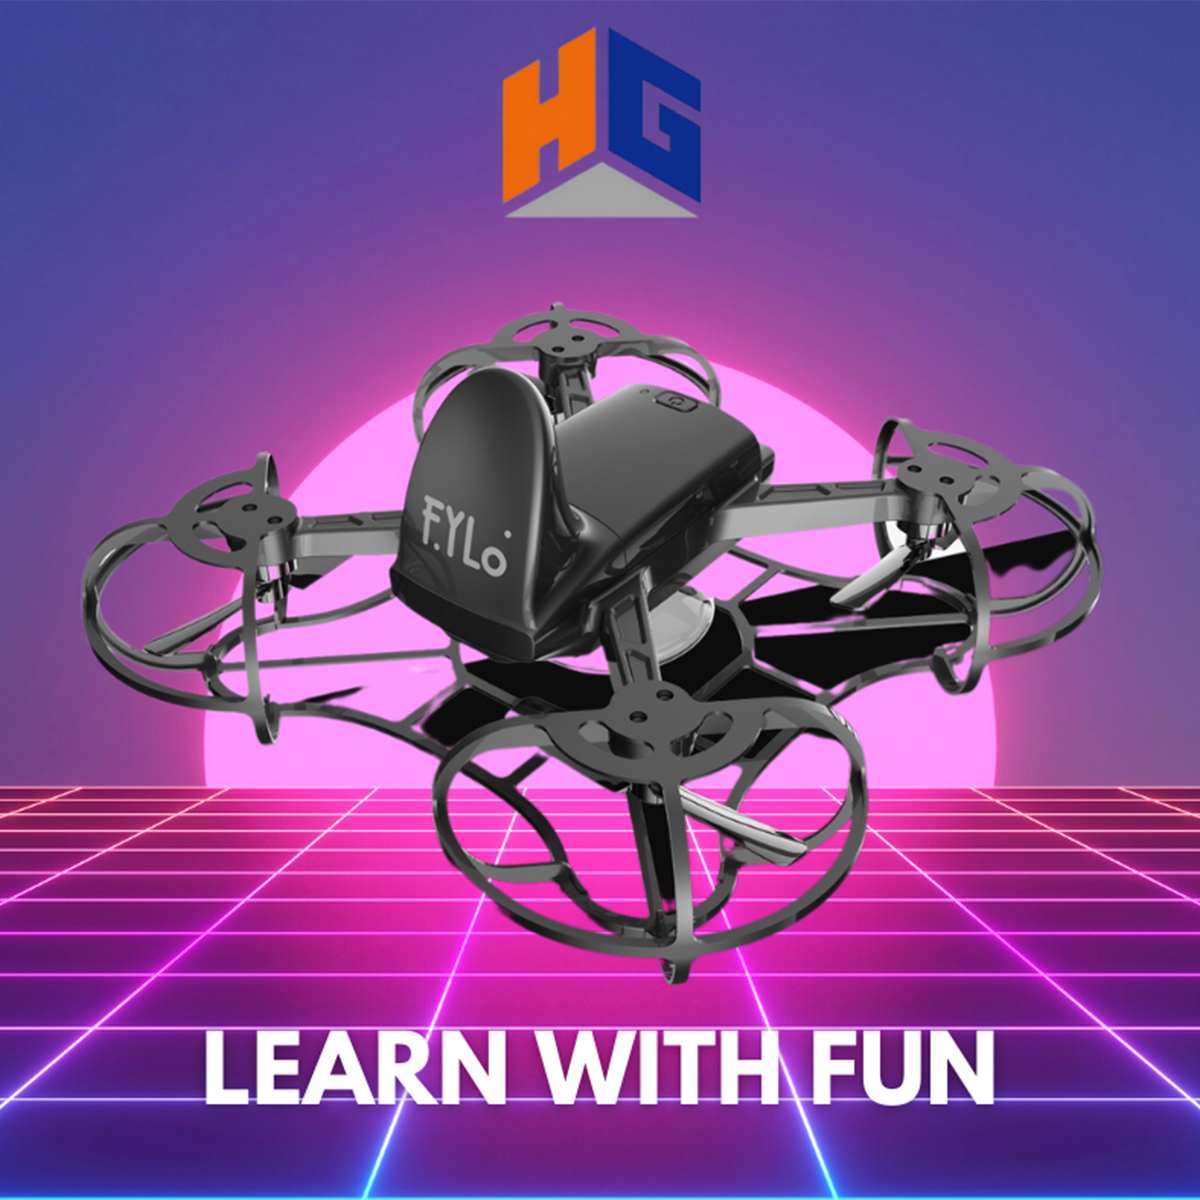 Achievements and Future development of indoor formation drone